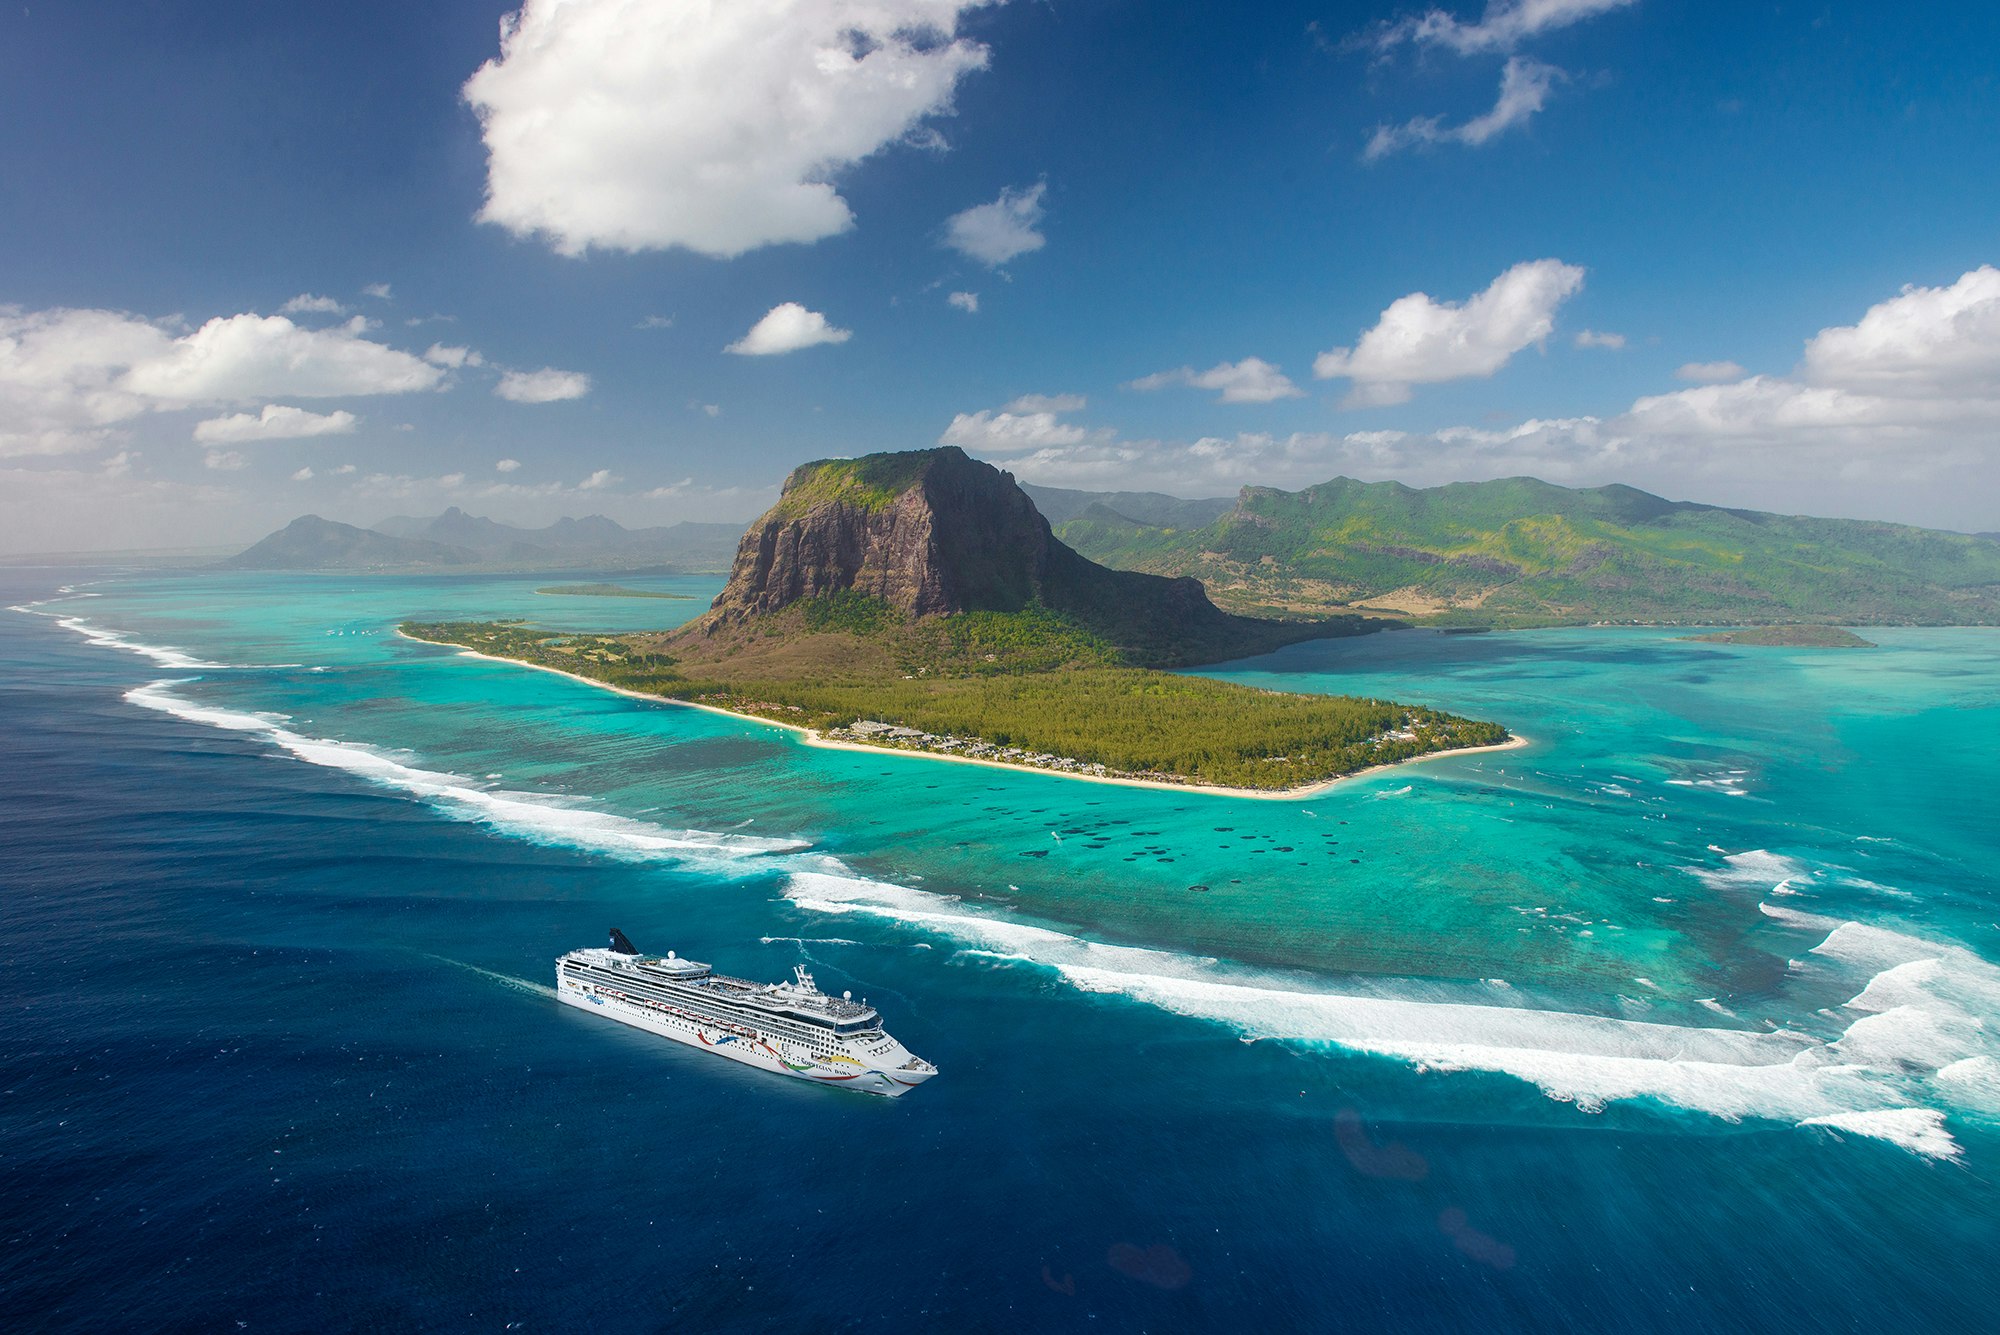 Aerial of Norwegian Dawn passing Le Morne mount, Port Louis, Mauritius island from helicopter.